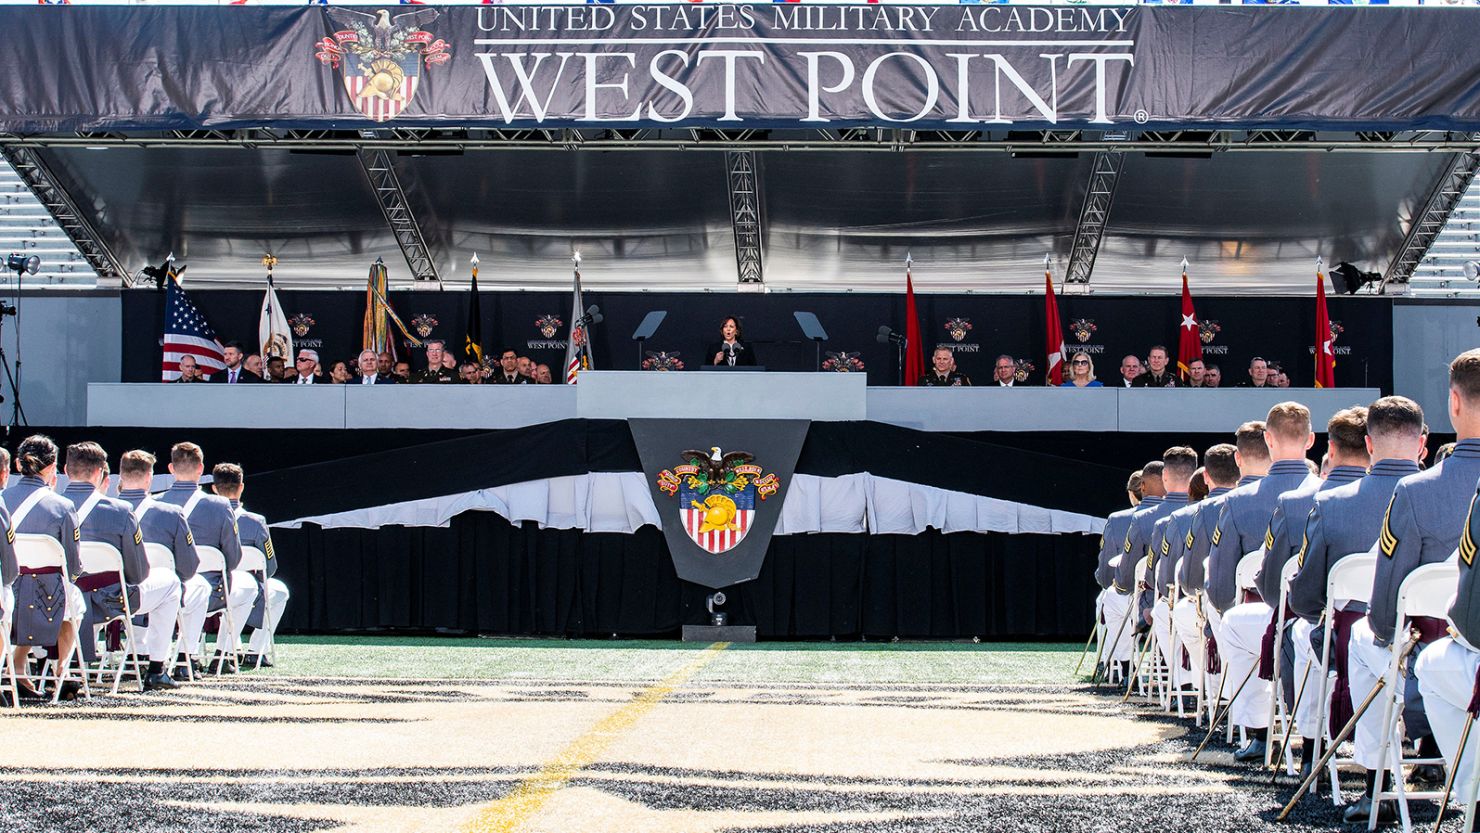 U.S. Vice President Kamala Harris speaks during the 2023 graduation ceremony at the United States Military Academy (USMA), at Michie Stadium in West Point, New York, U.S., May 27, 2023.